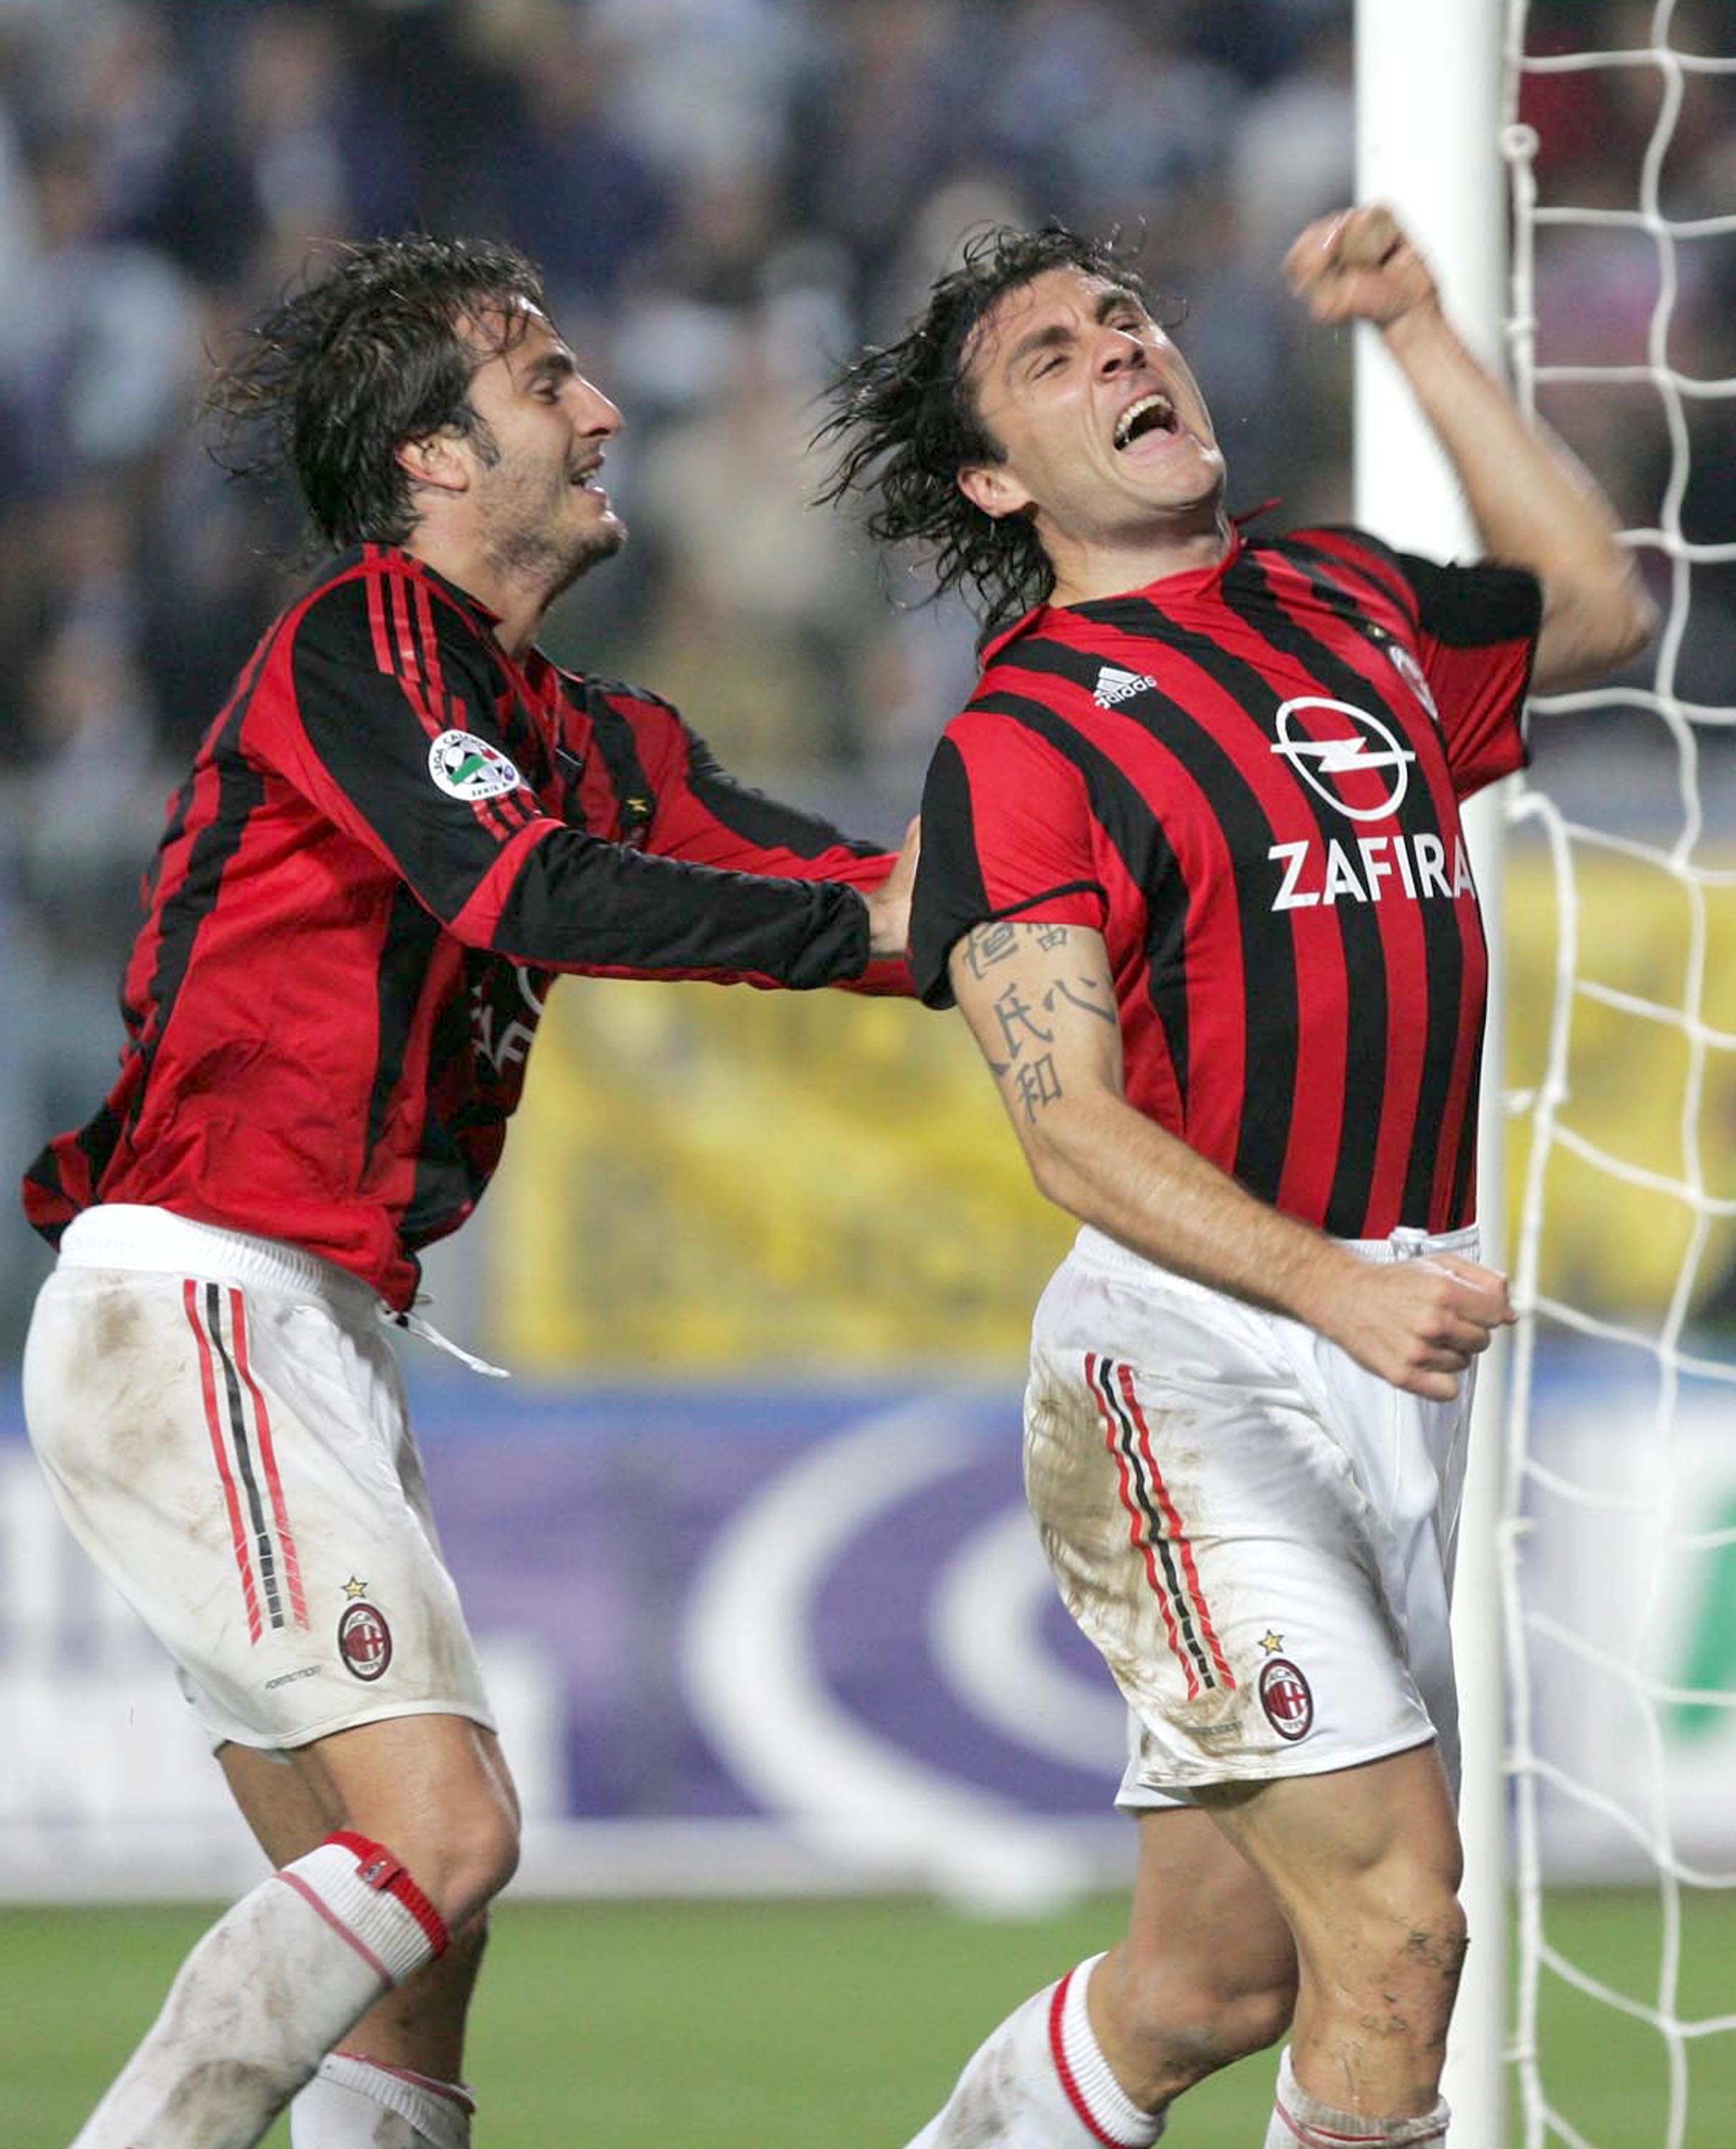 EMPOLI, ITALY - OCTOBER 26:  Alberto Gilardino #11 and Christian Vieri #32 of AC Milan celebrate a goal during the Serie A match between Empoli and AC Milan on October 26, 2005 at the Stadio Carlo Castellani in Empoli, Italy.  (Photo by New Press/Getty Im